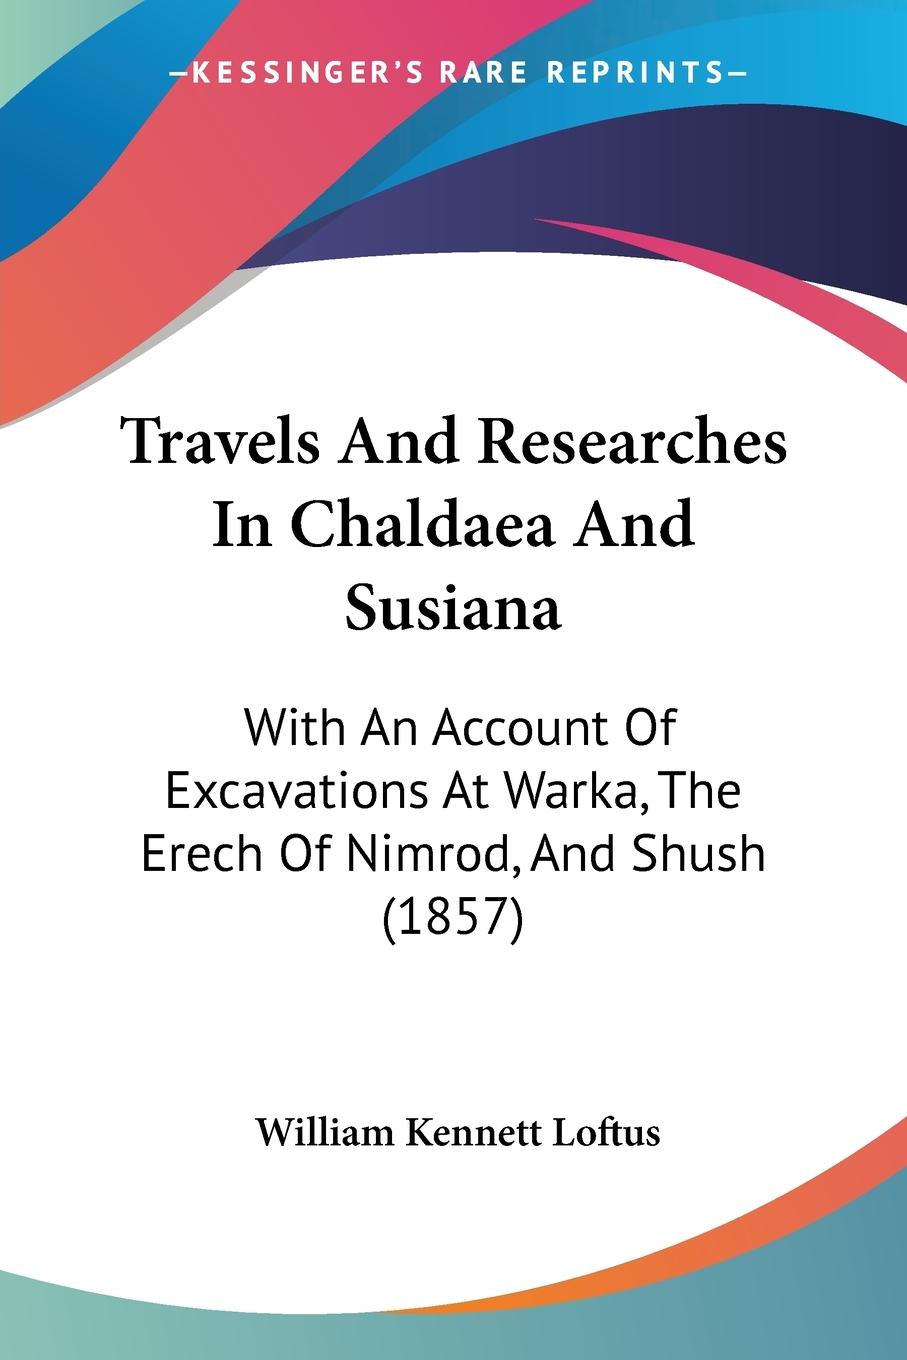 Travels And Researches In Chaldaea And Susiana - Loftus, William Kennett